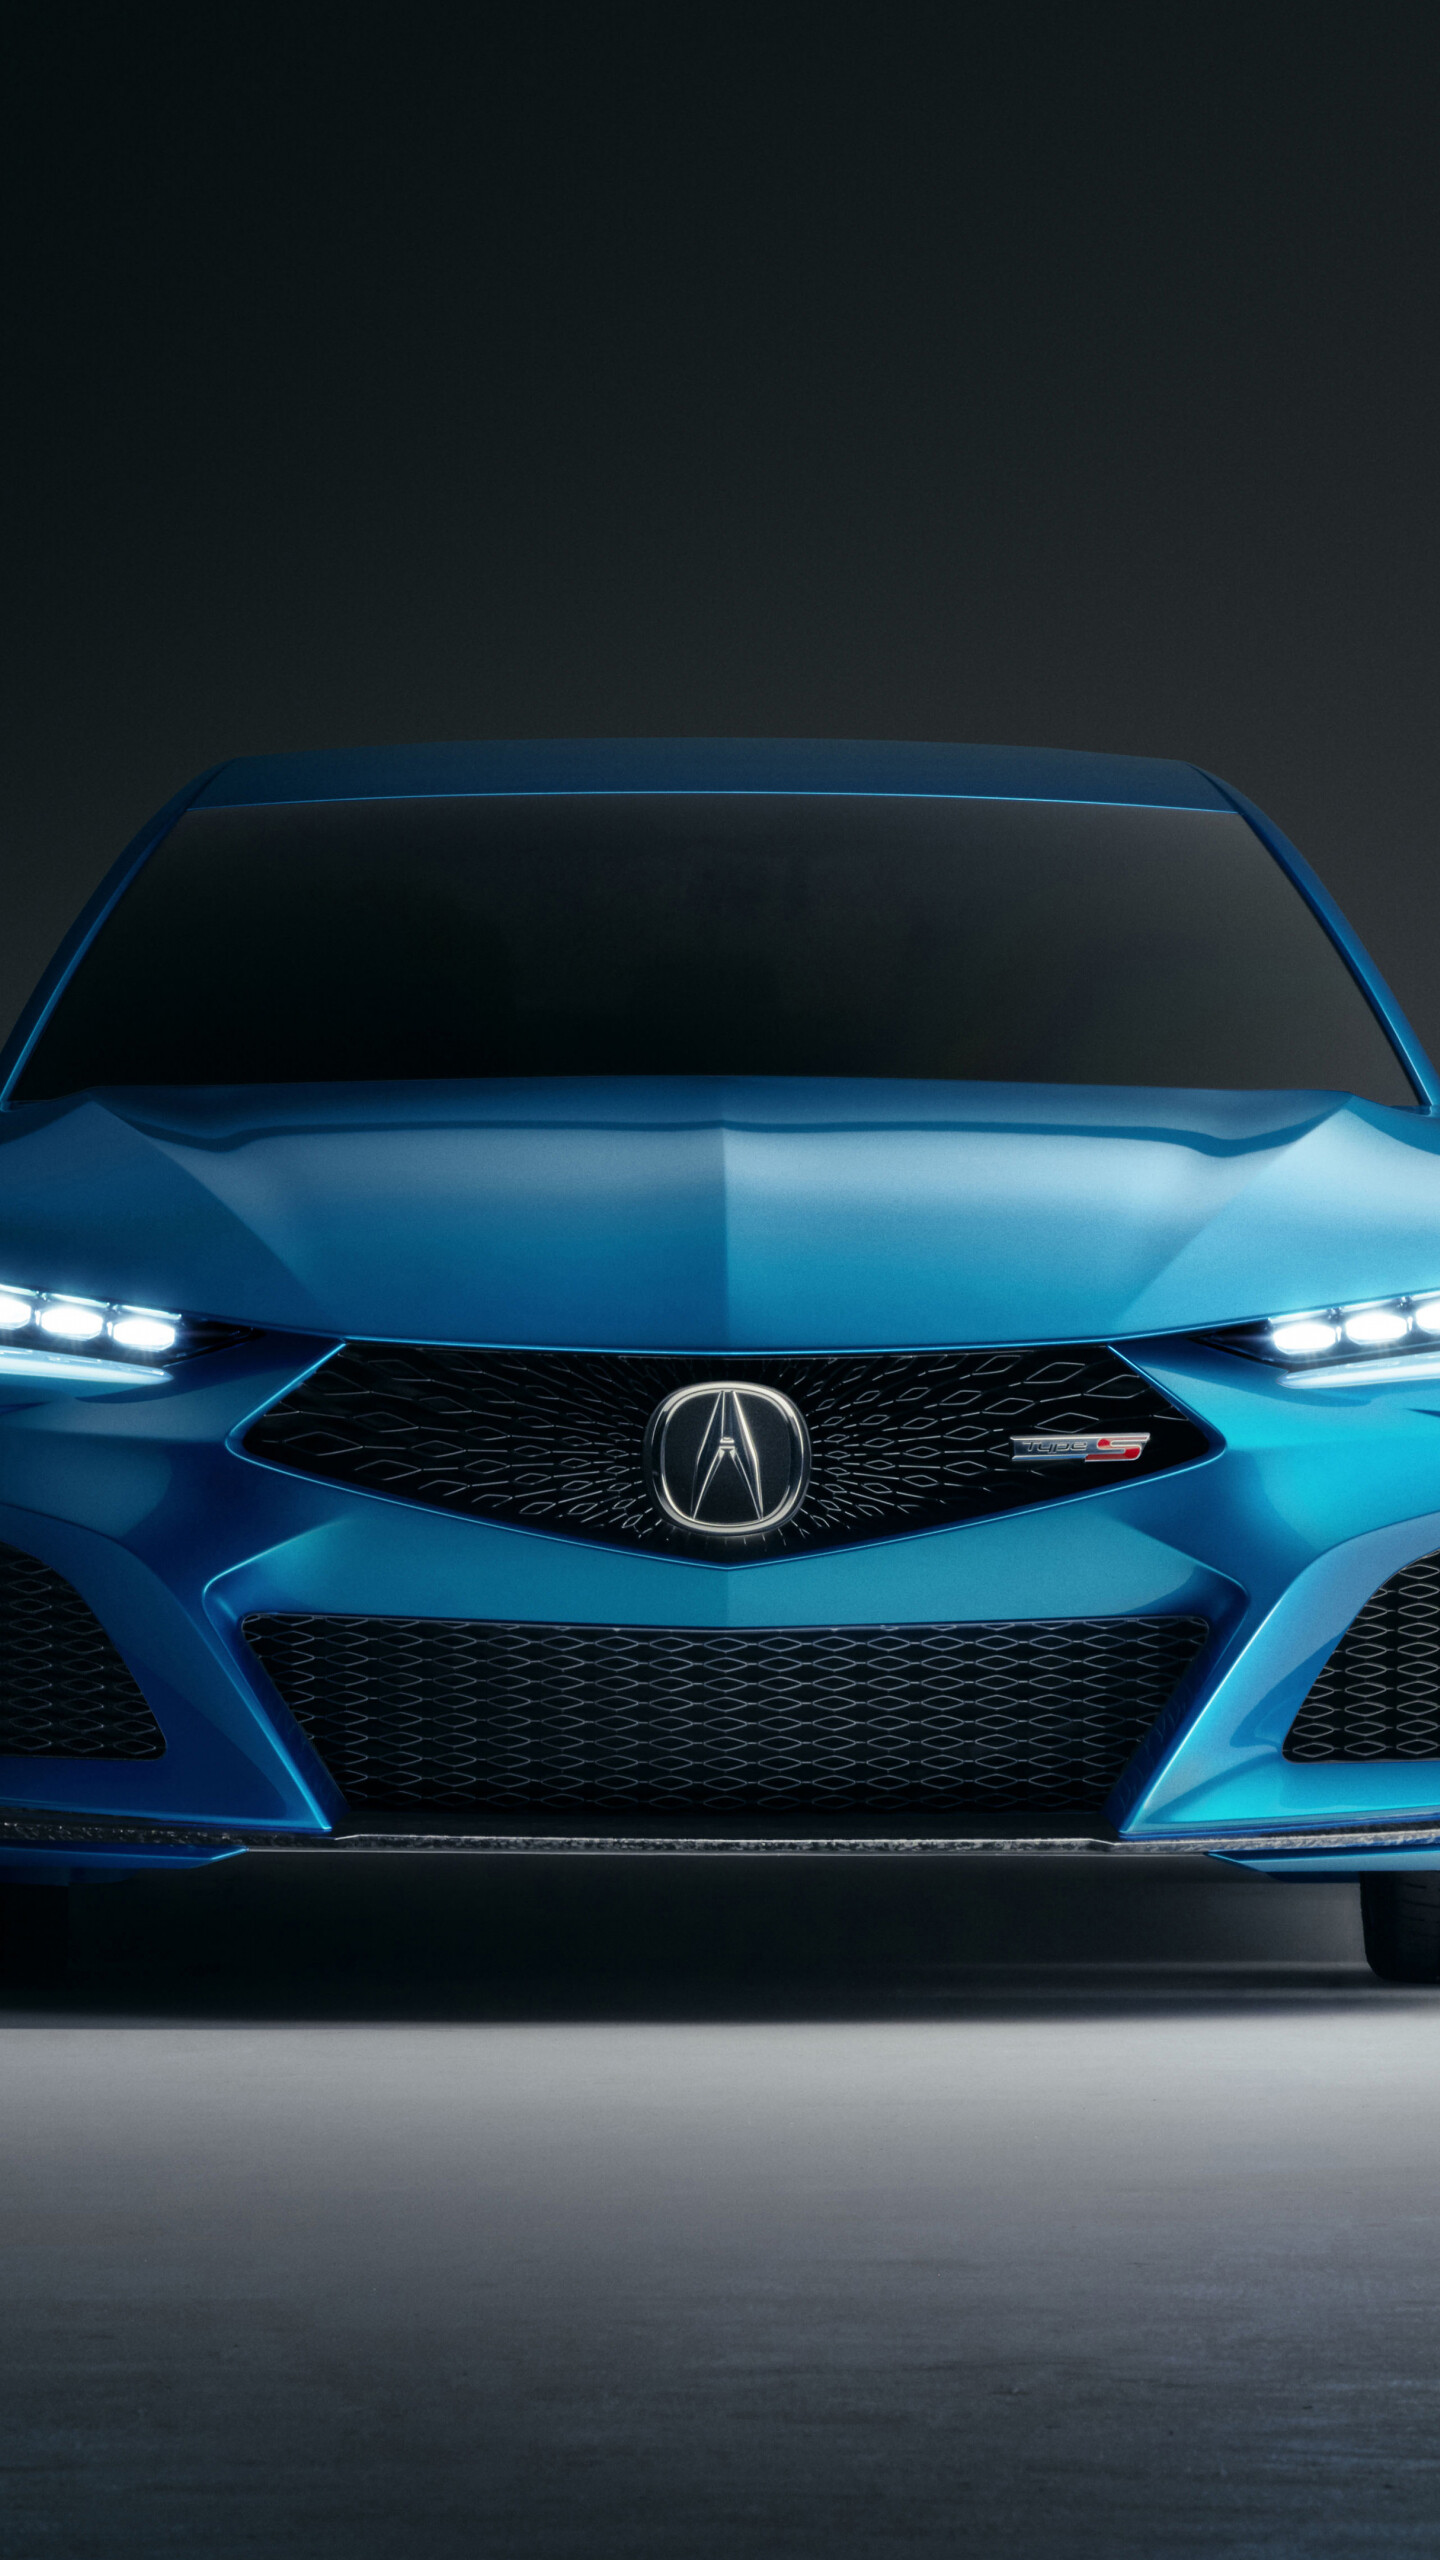 Acura: Type S, A sporty concept car that previews the next-generation TLX sedan. 1440x2560 HD Wallpaper.